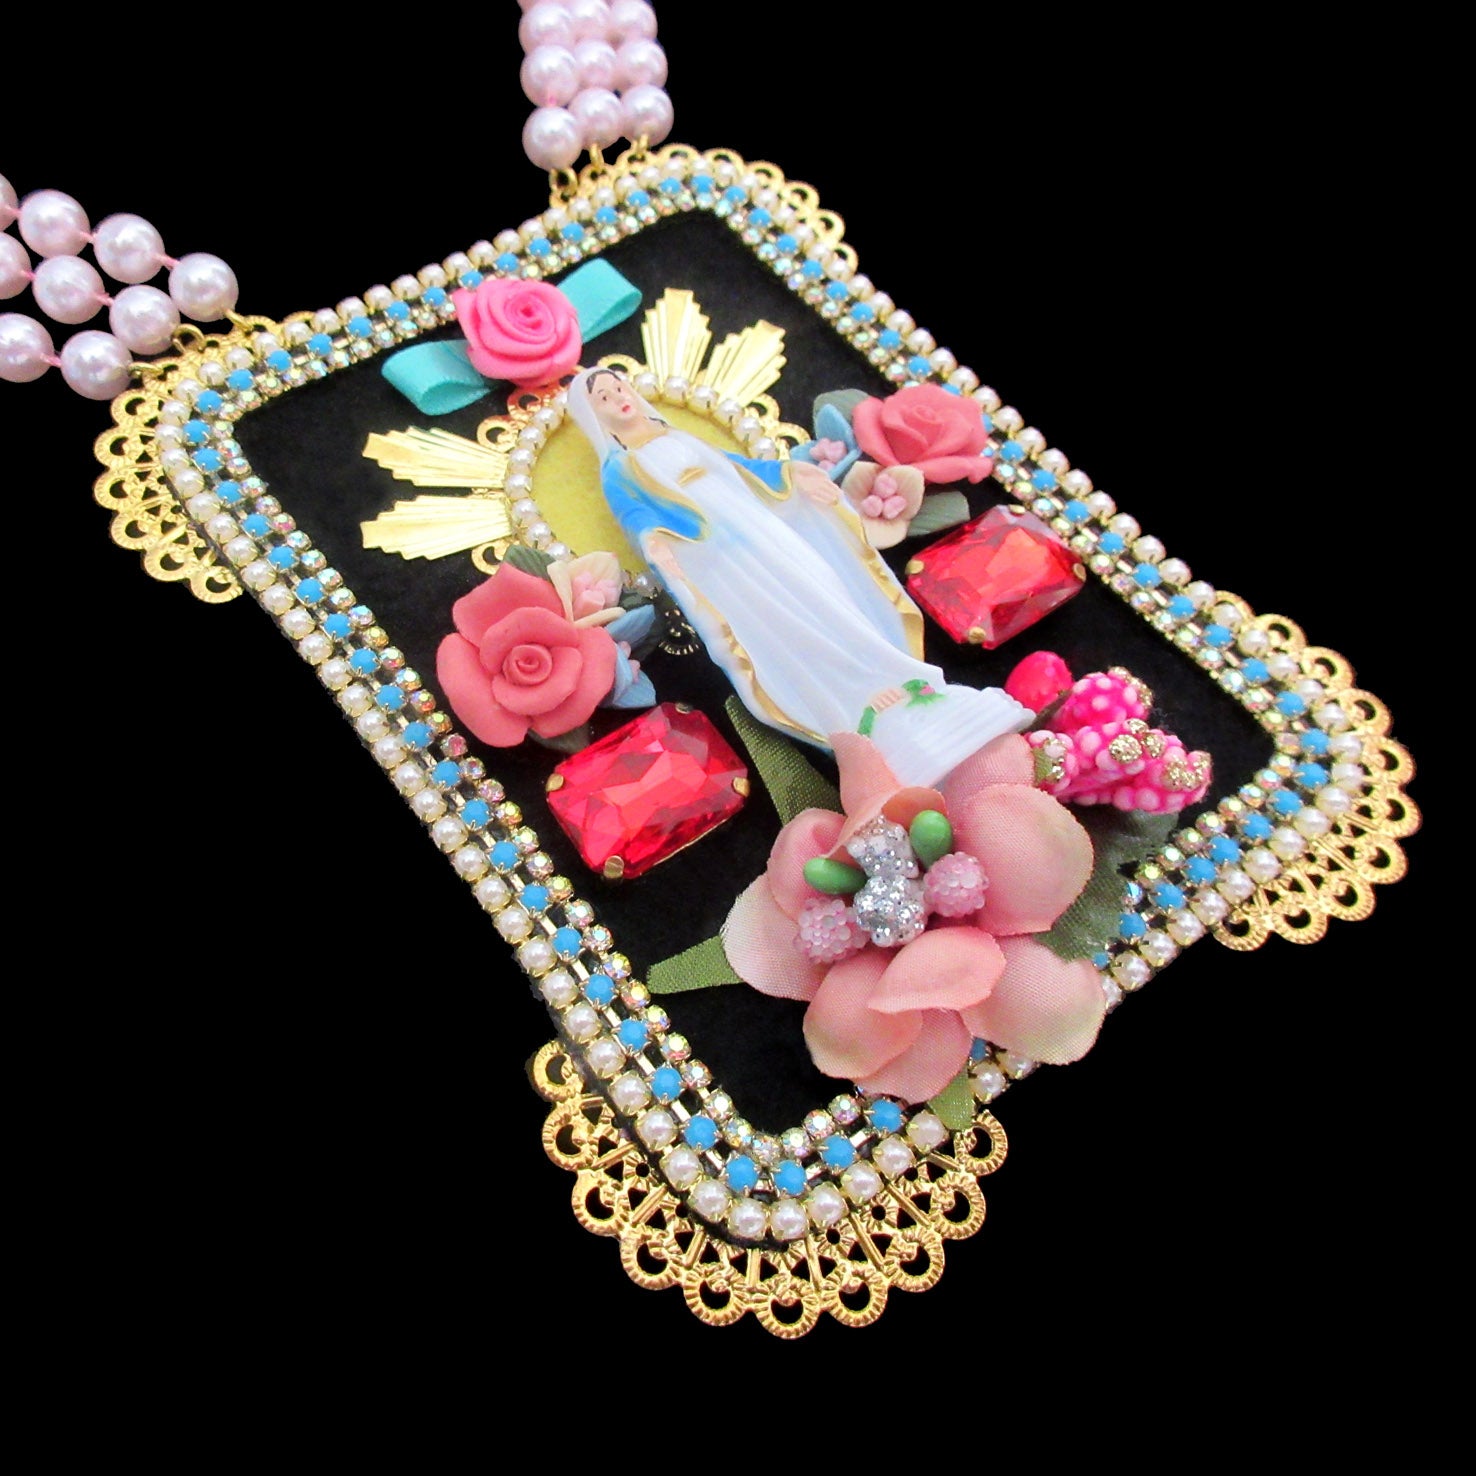 mouchkine jewelry handmade couture madonna iconic statement necklace.